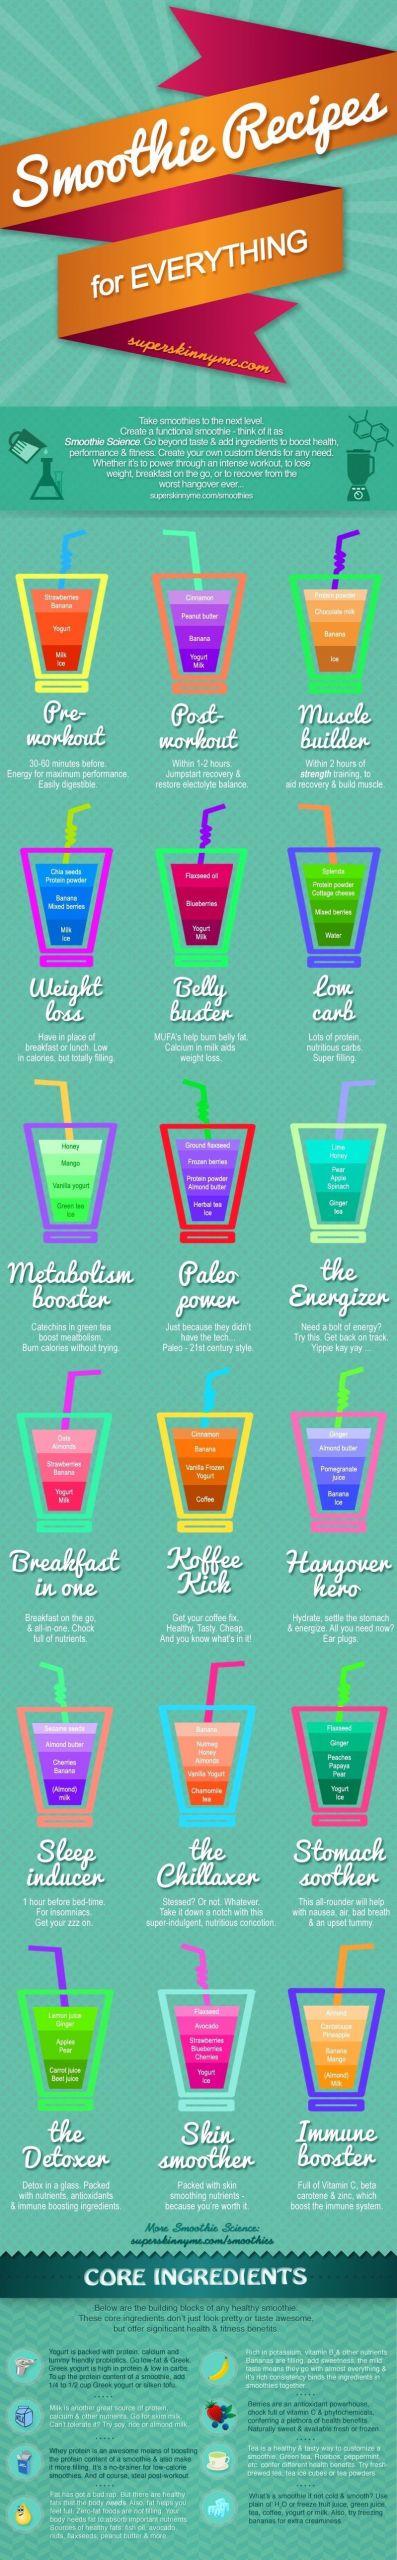 Pre Made Smoothies For Weight Loss
 74aef3d5dfdebaa6fe3b8b2cd2175abe 799×5 148 pixels